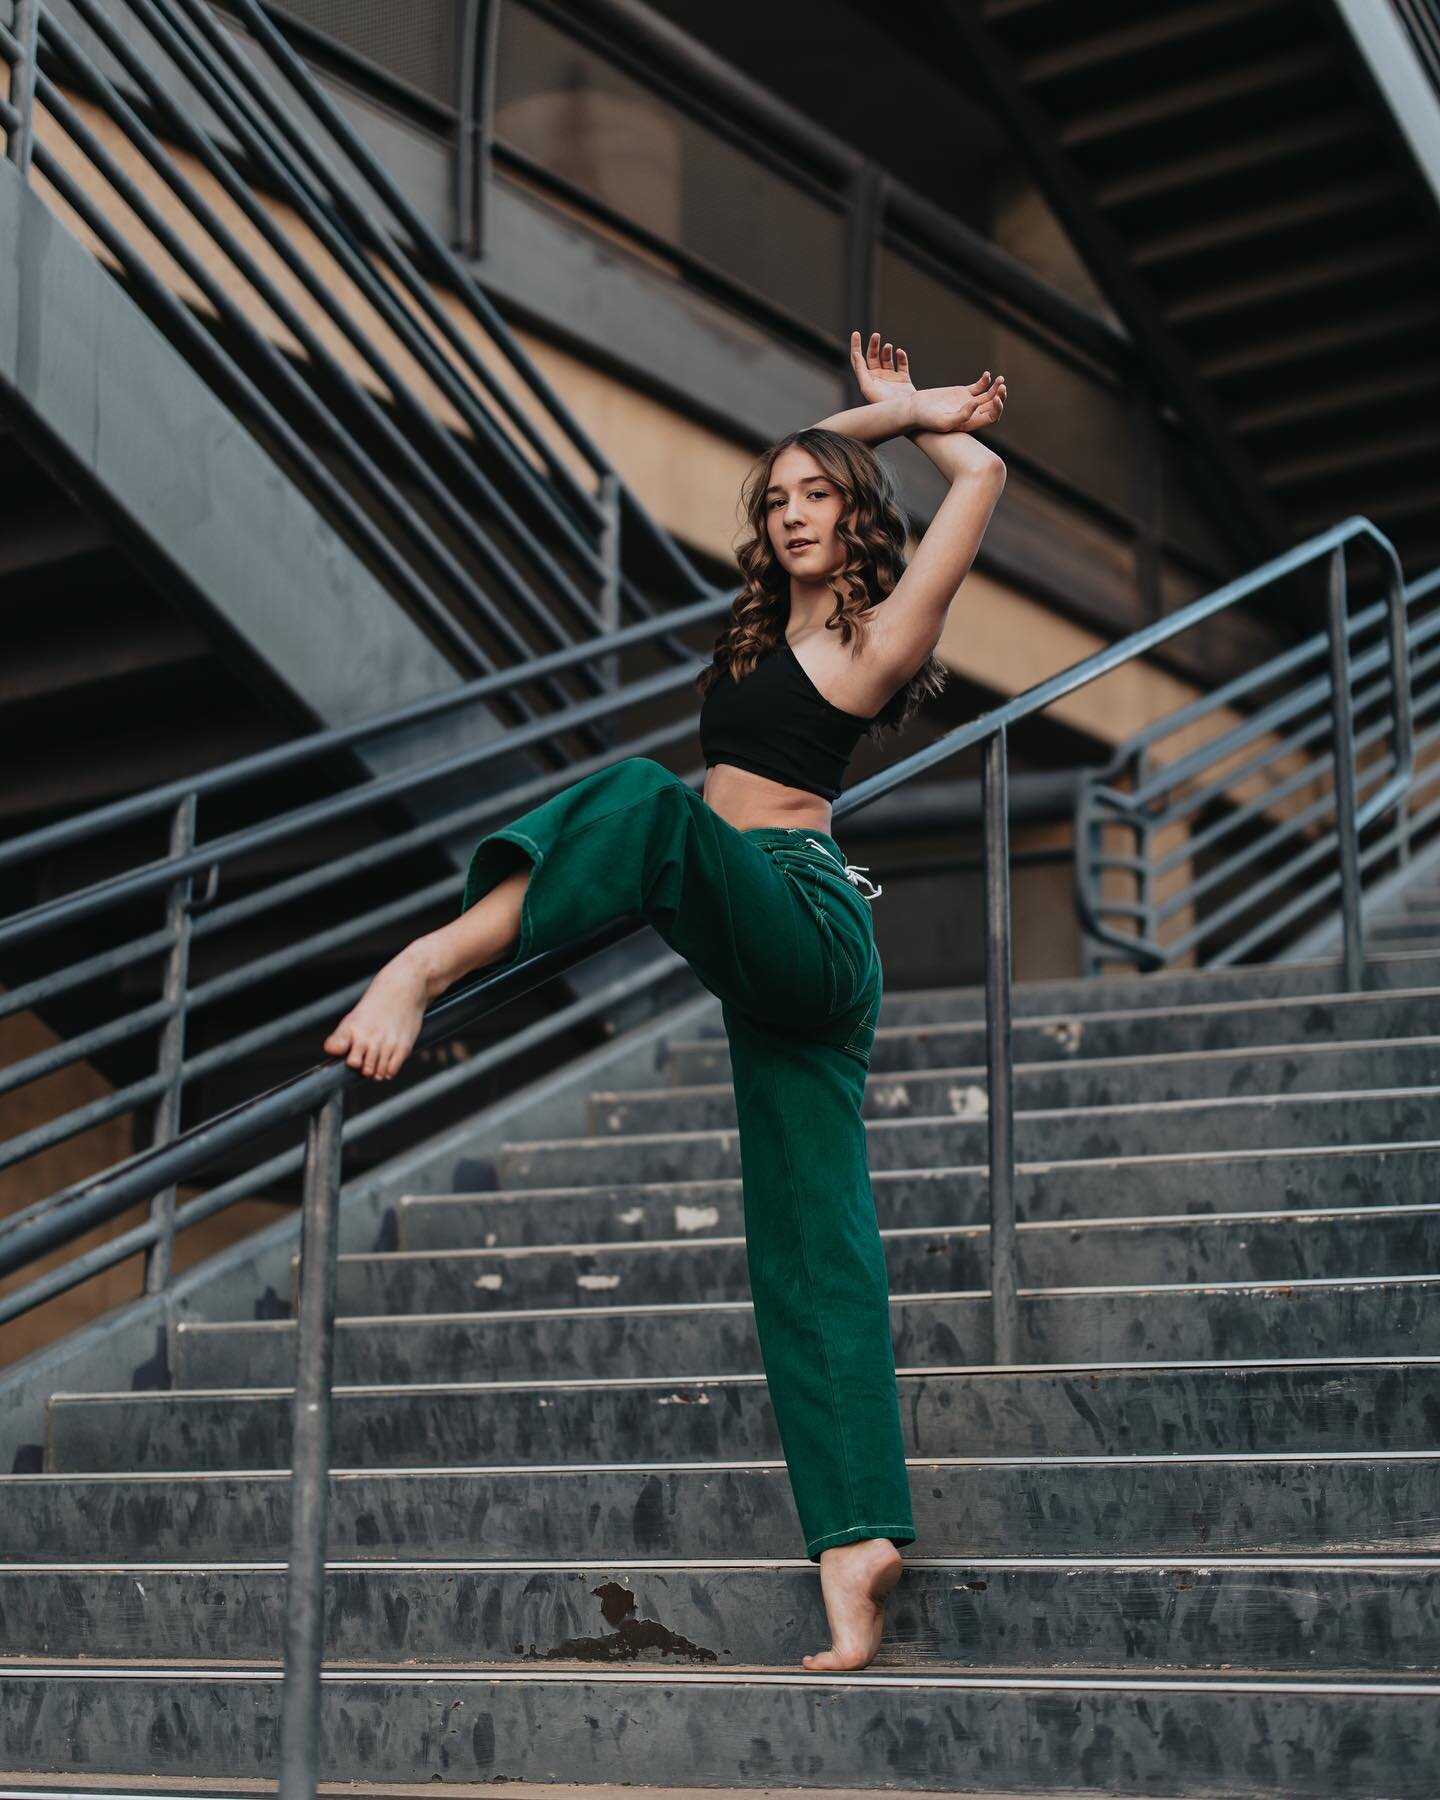 Exciting news: my summer 2023 ambassador search for CA and AZ dancers is now open!! Visit the link in my bio to fill out your application today💃🏻✨ #clairefabrephotography